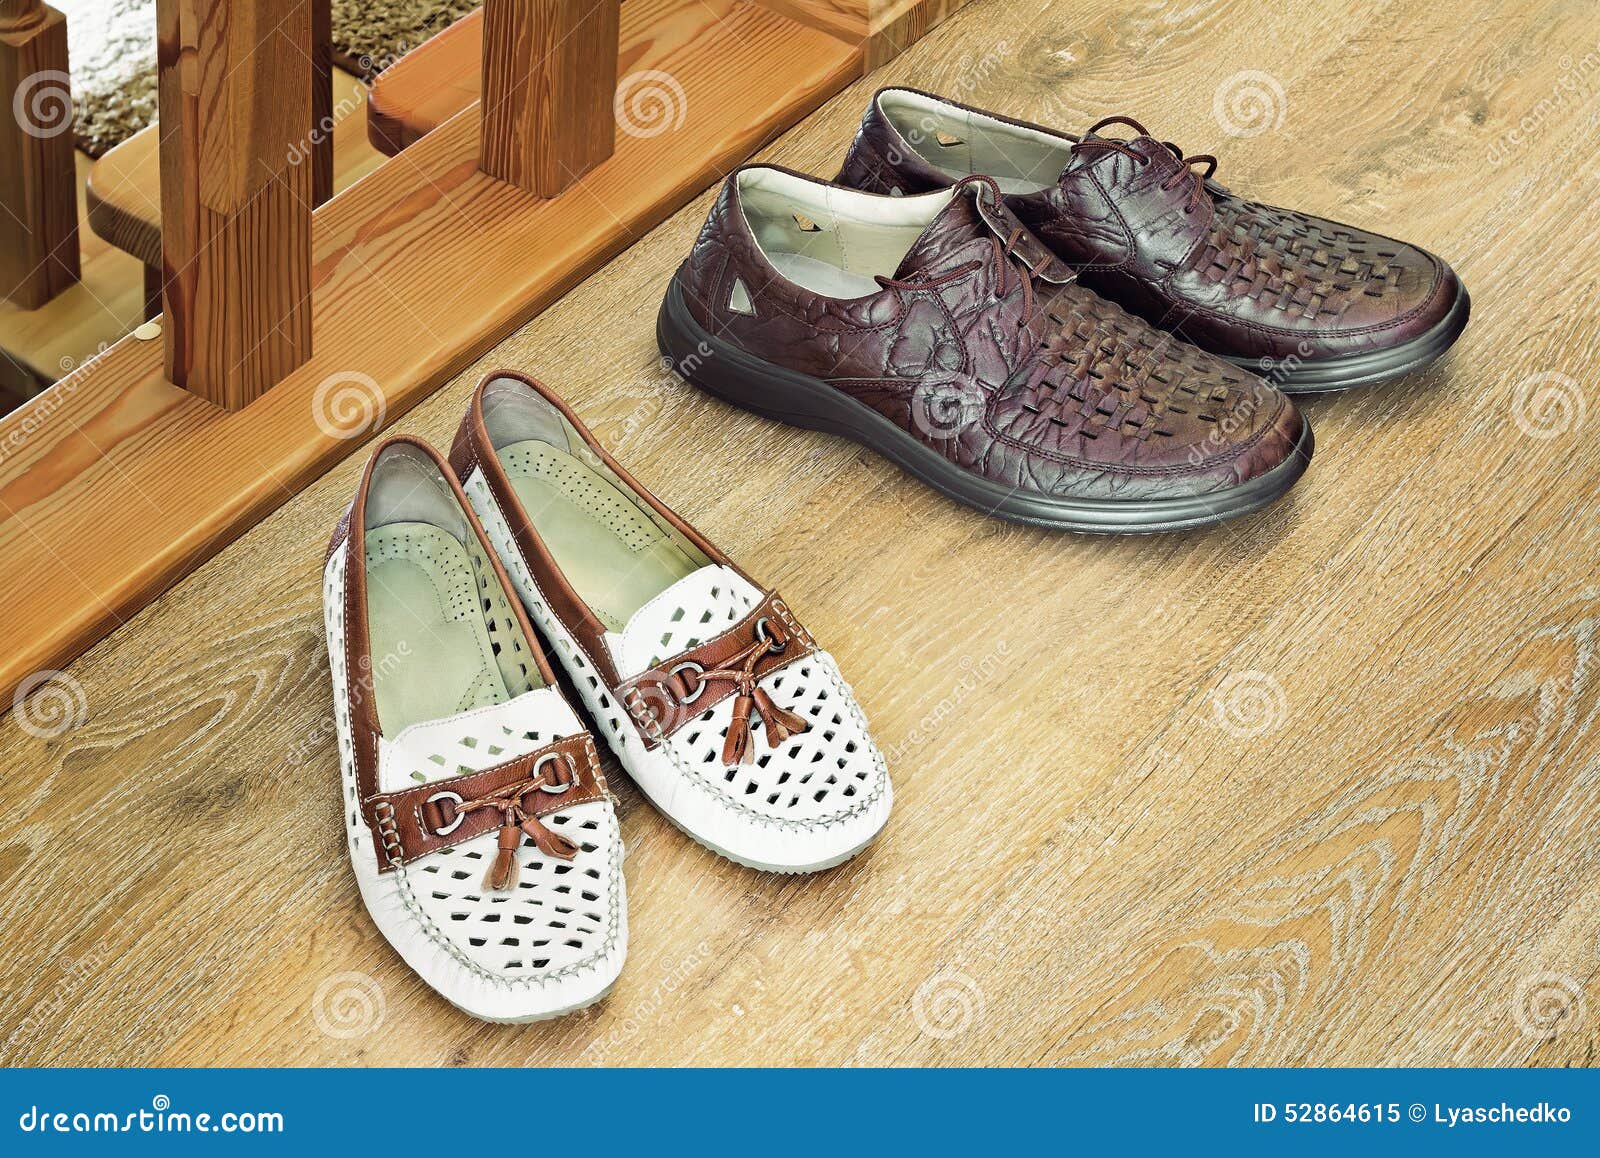 Two Pairs of Comfortable Shoes : for Men and for Women. Stock Image ...